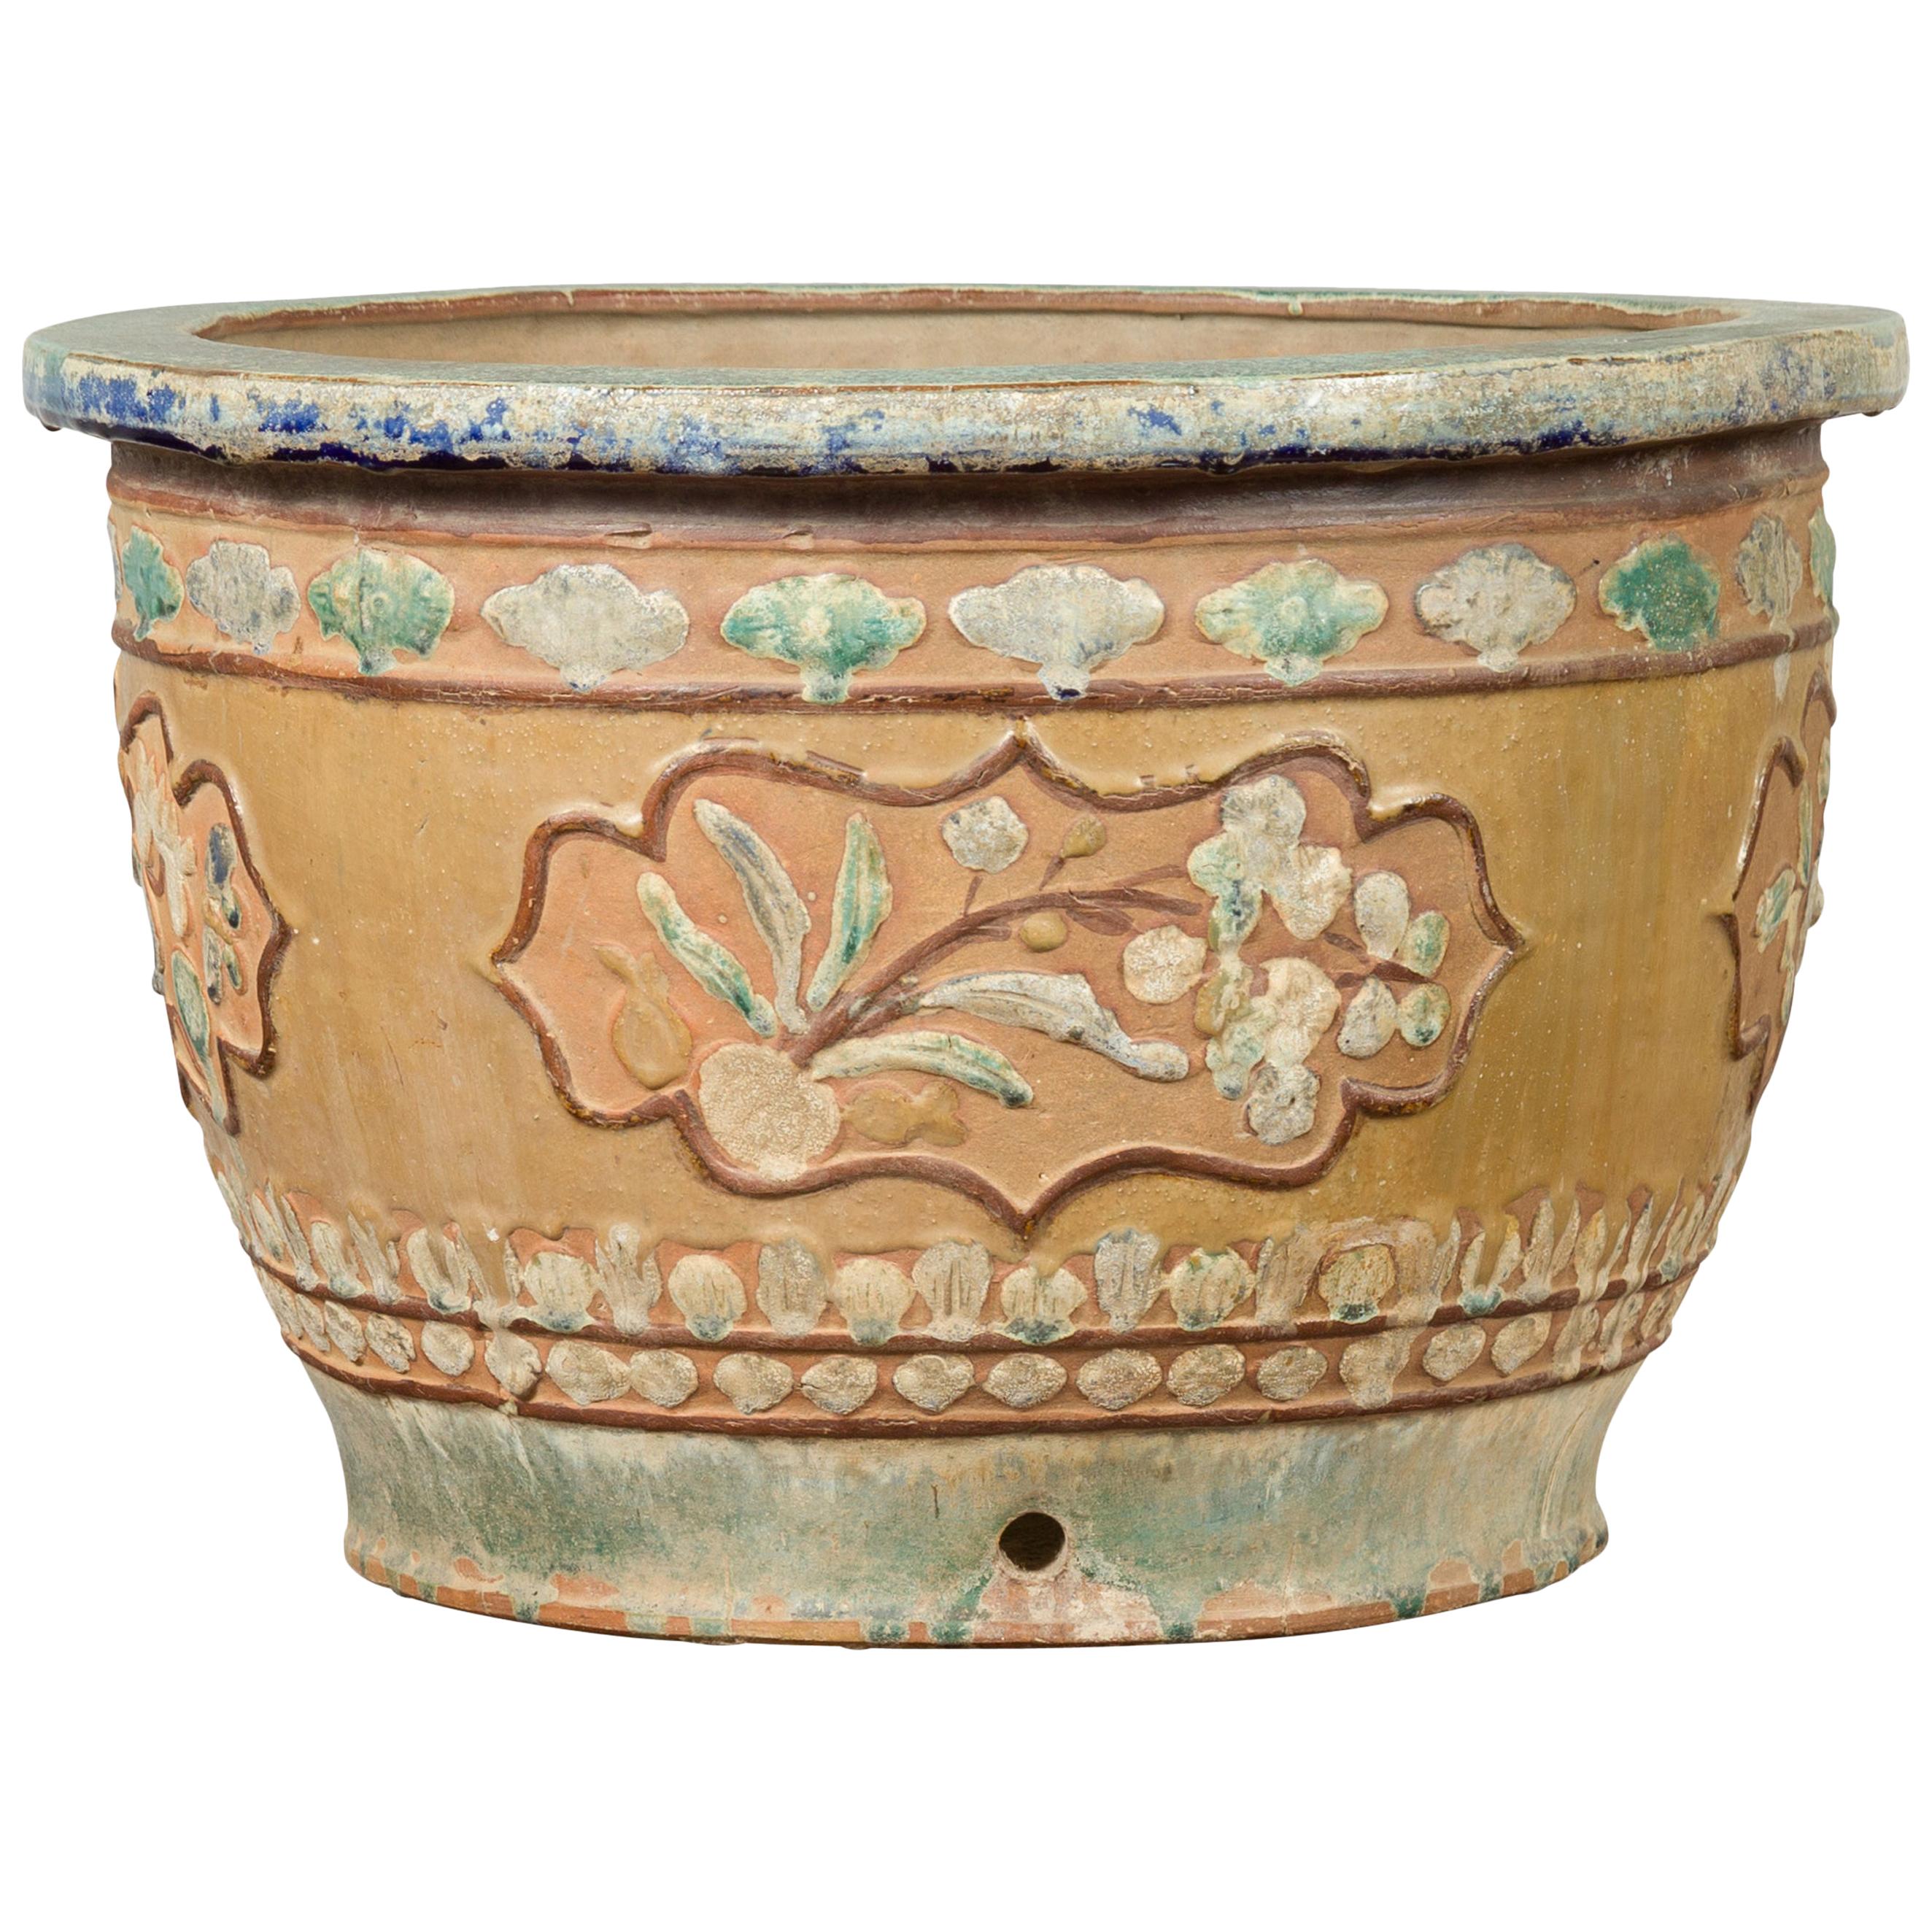 Antique Annamese 19th Century Planter with Floral Decor and Distressed Patina